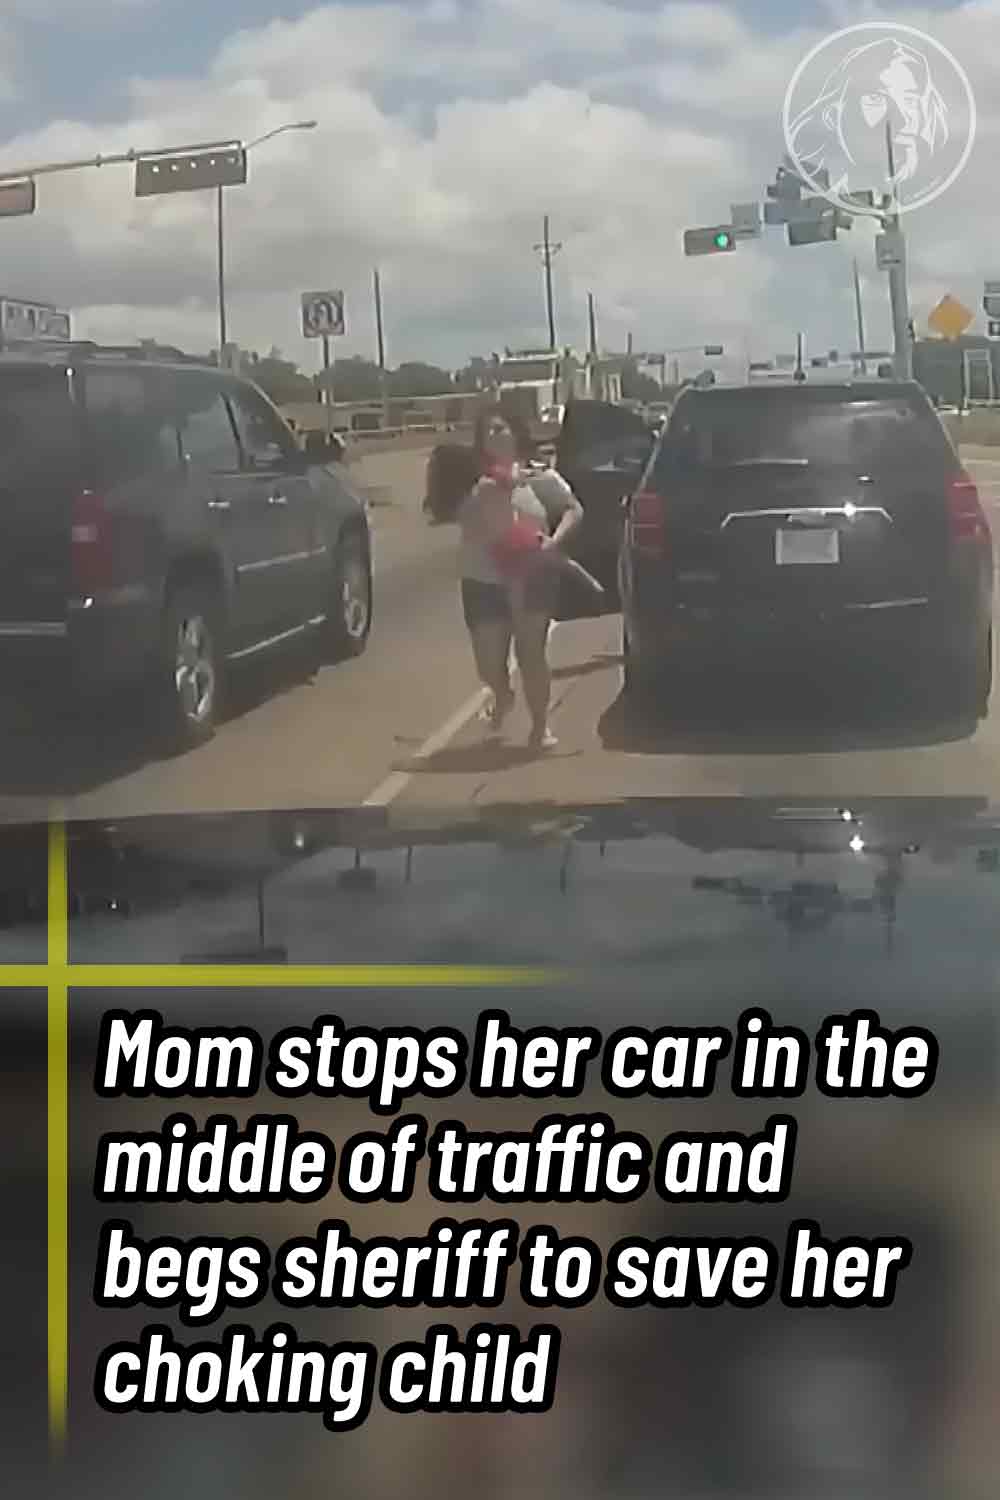 Mom stops her car in the middle of traffic and begs sheriff to save her choking child